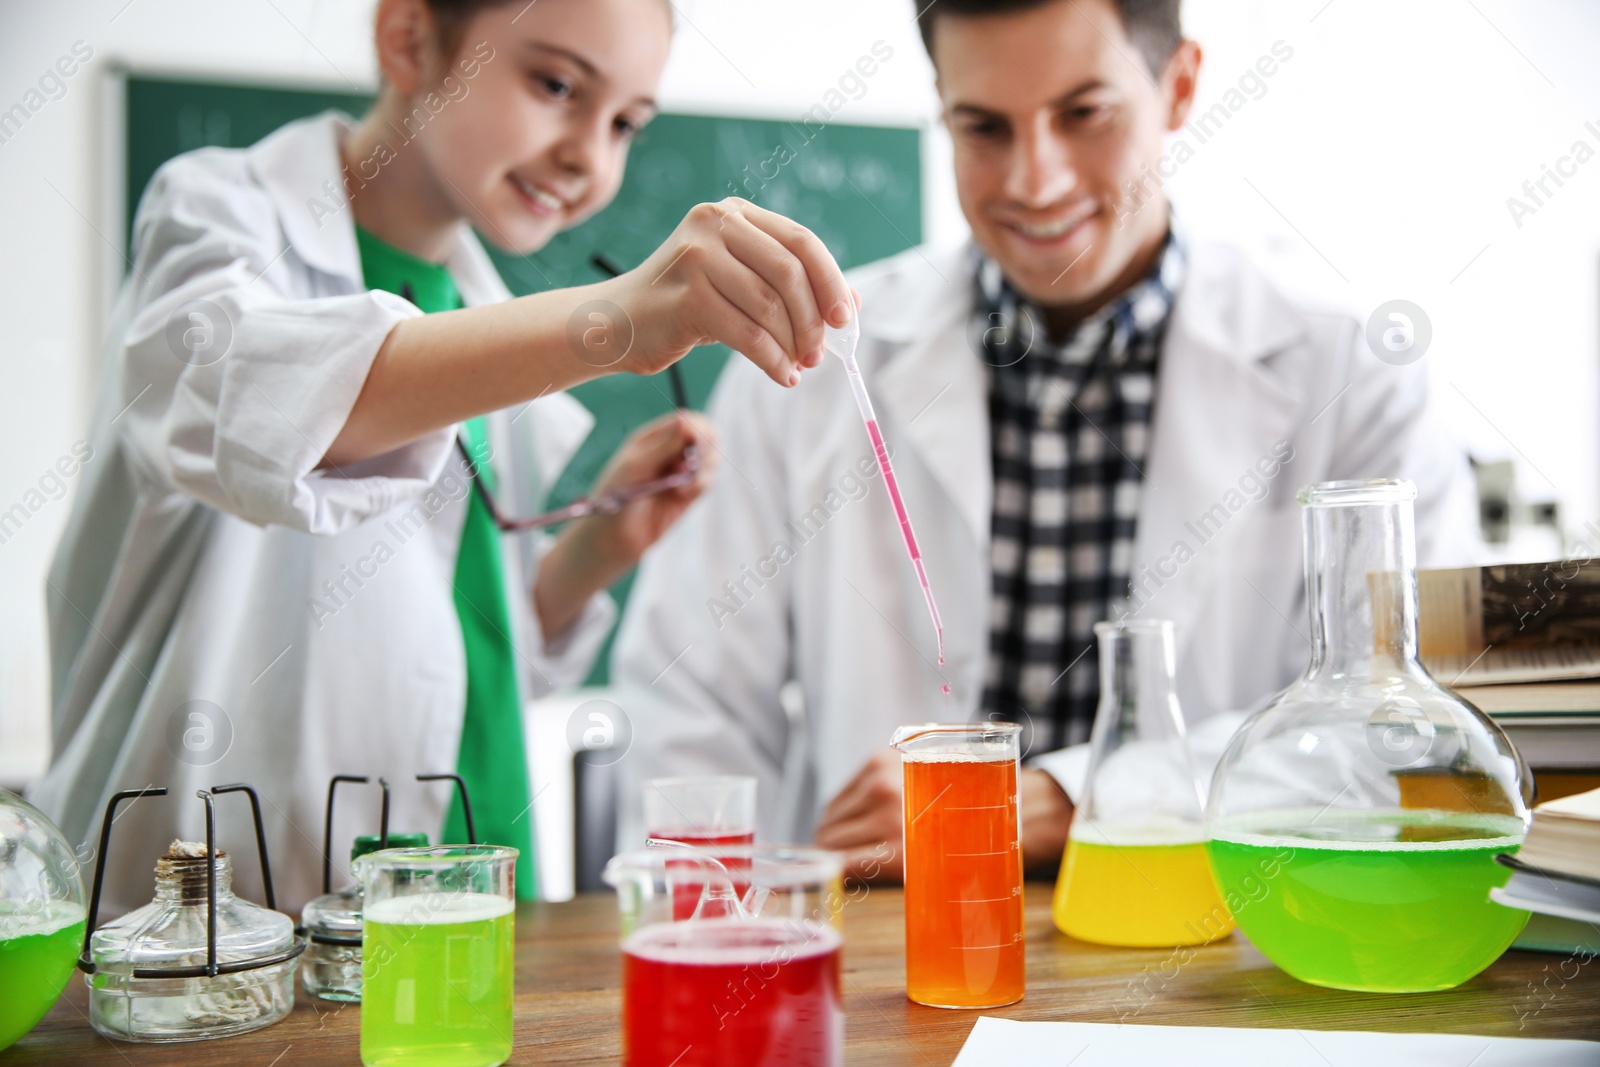 Photo of Teacher with pupil making experiment at table in chemistry class, focus on hand